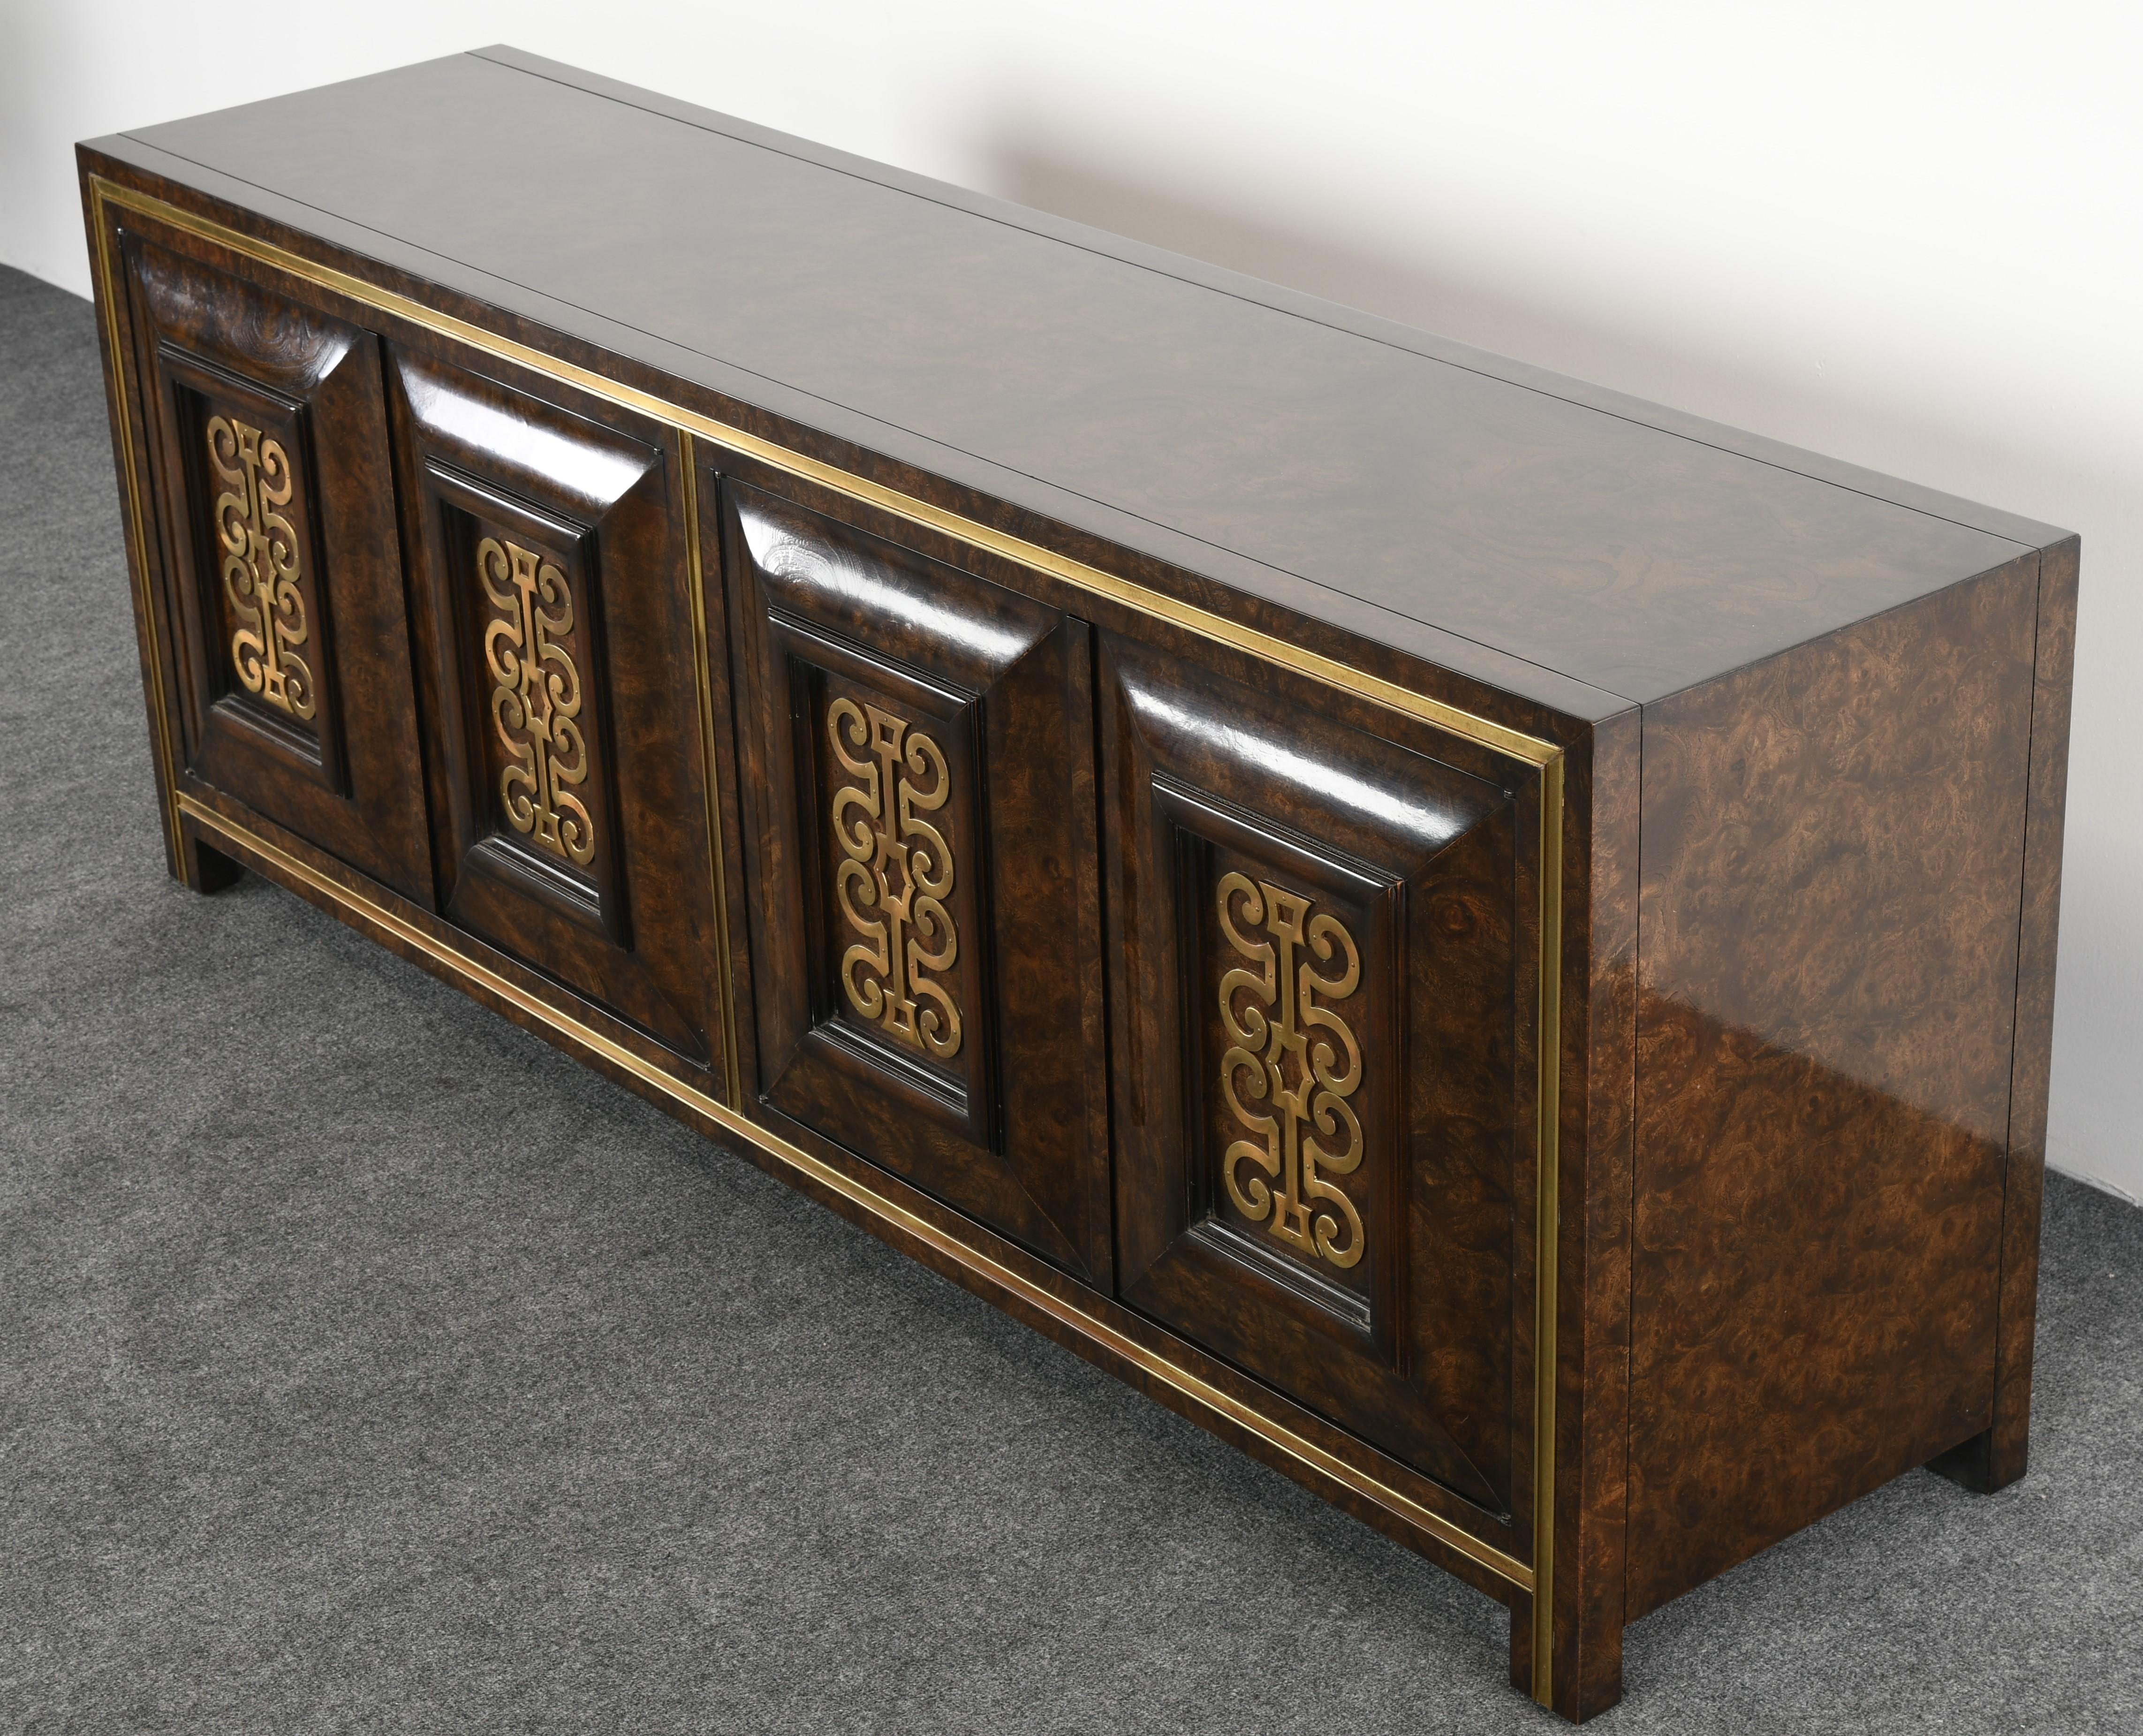 A stunning brass decorated Carpathian elm Mastercraft credenza or sideboard. Designed by William Doezema. Lovely detail of the brass design on the front of the cabinets. Would look great in an antique, modern or contemporary setting. Structurally